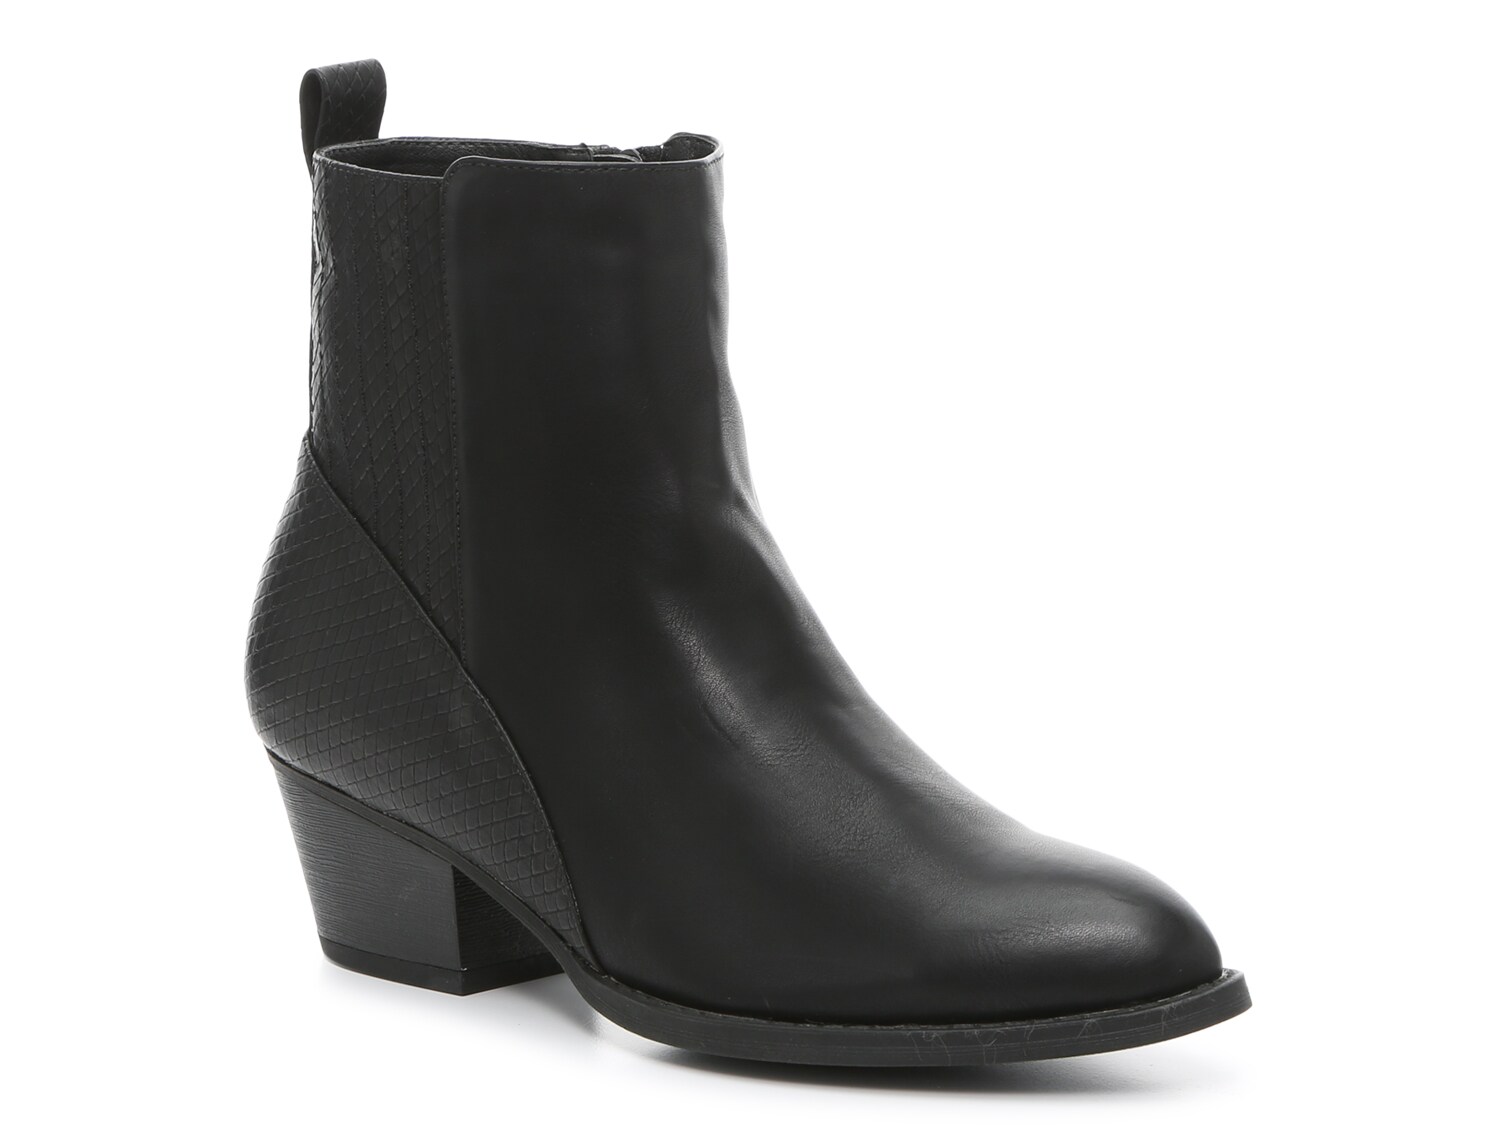 CL by Laundry Cicily Bootie - Free Shipping | DSW